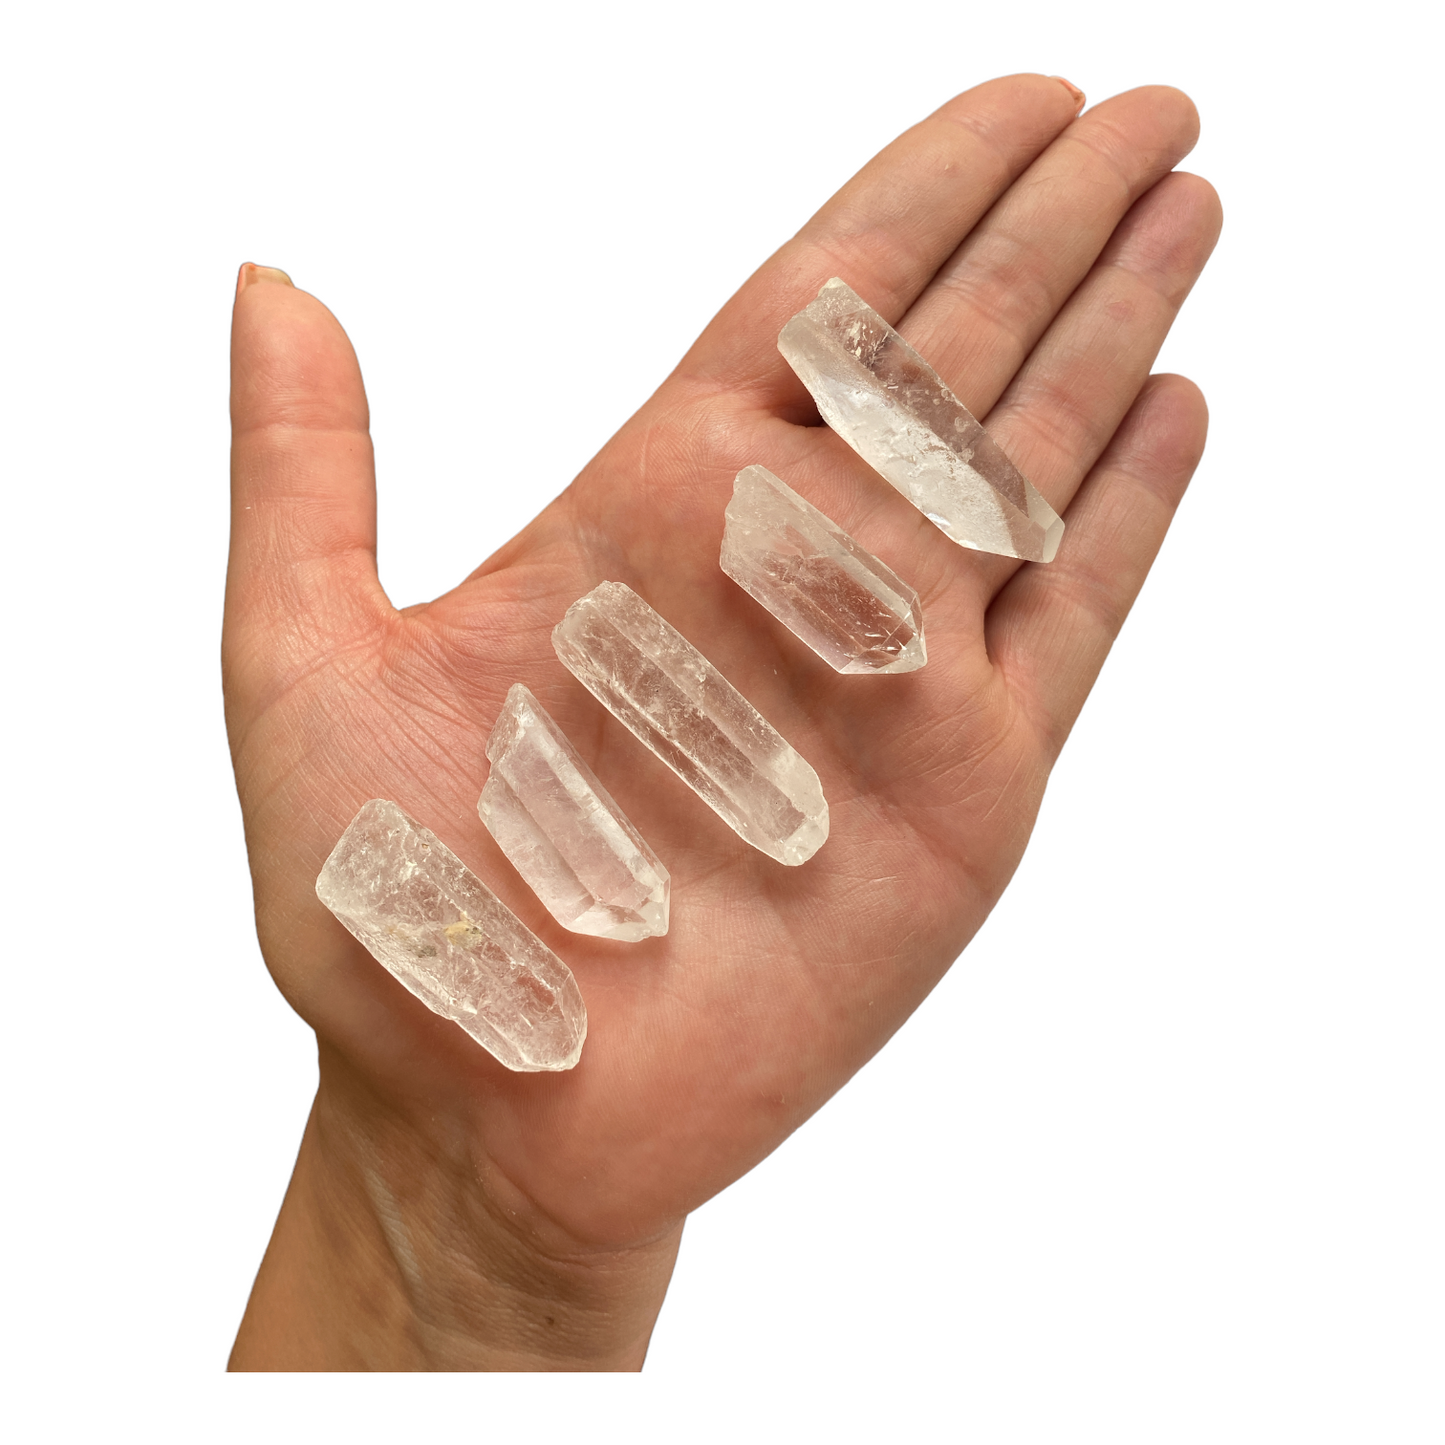 Clear Quartz Natural Pointers - Crystal Geological